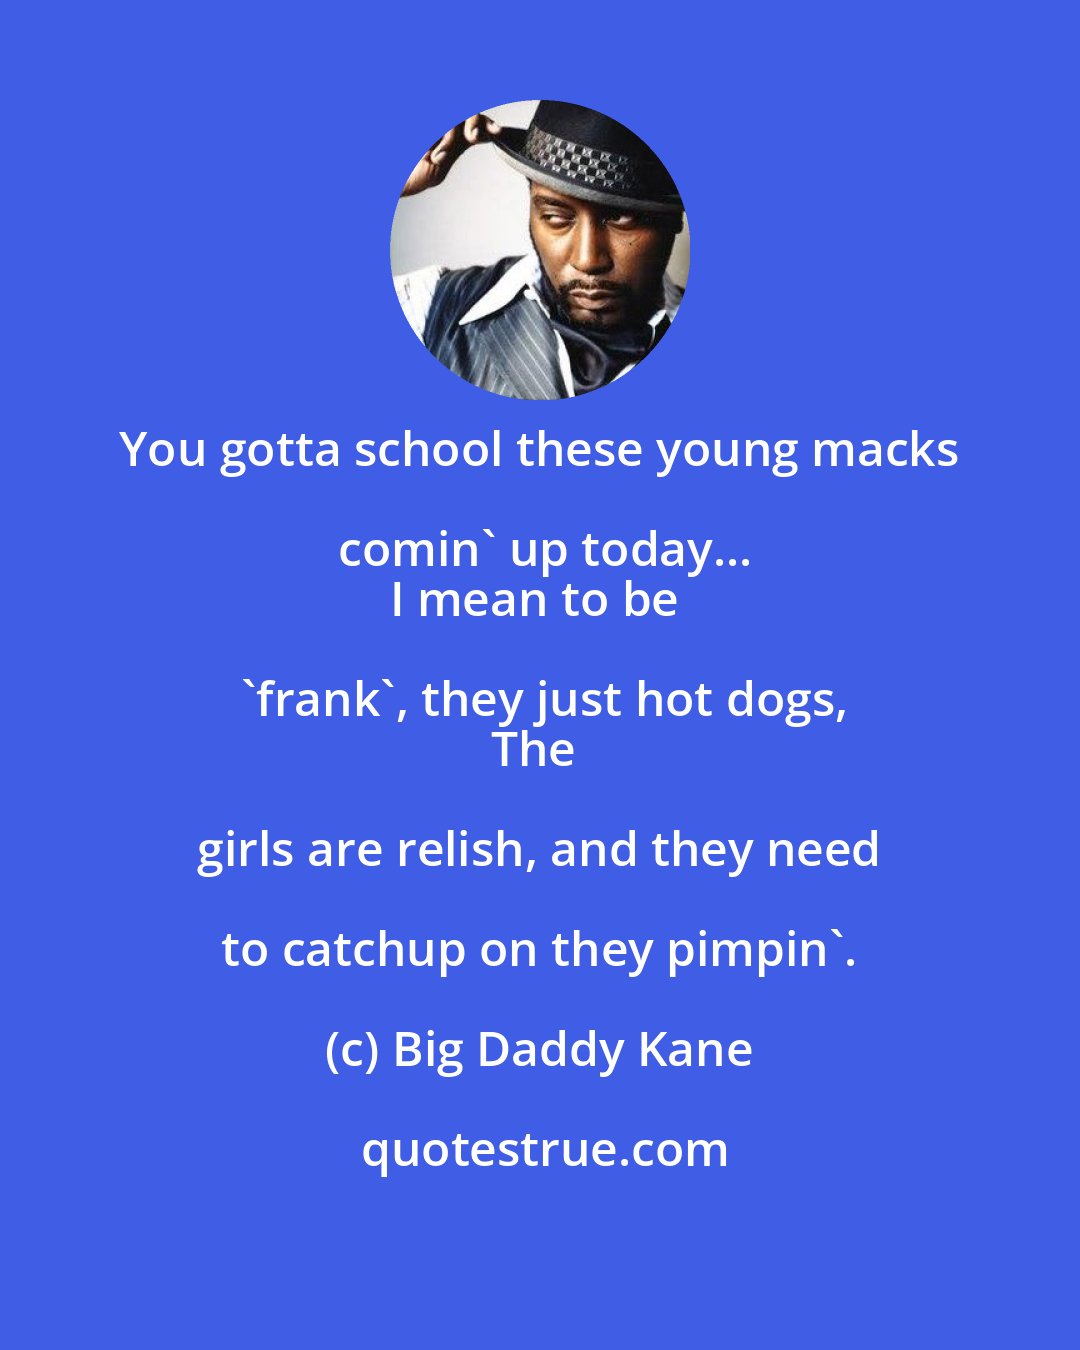 Big Daddy Kane: You gotta school these young macks comin' up today...
I mean to be 'frank', they just hot dogs,
The girls are relish, and they need to catchup on they pimpin'.